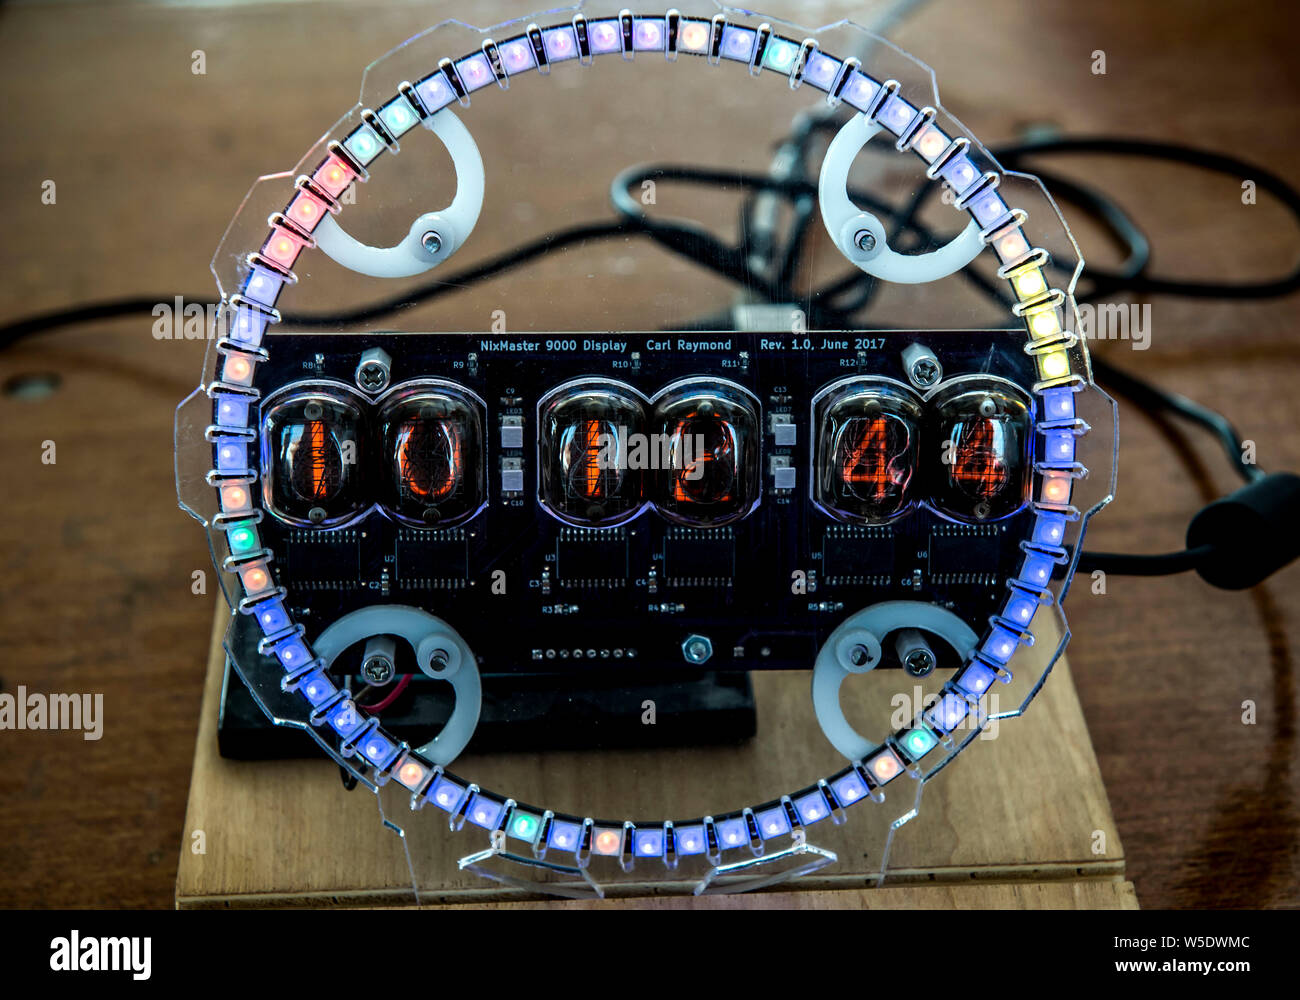 Dearborn, Michigan, USA. 28th July, 2019. An atomic nixie tube clock by Carl Raymond is displayed during the 10th Annual Maker Faire Detroit at the Henry Ford Museum of American Innovation. Maker Faire is a gathering of tech enthusiasts, tinkerers, engineers and science club members who gather to show and share knowledge about what they've made. Credit: Brian Cahn/ZUMA Wire/Alamy Live News Stock Photo